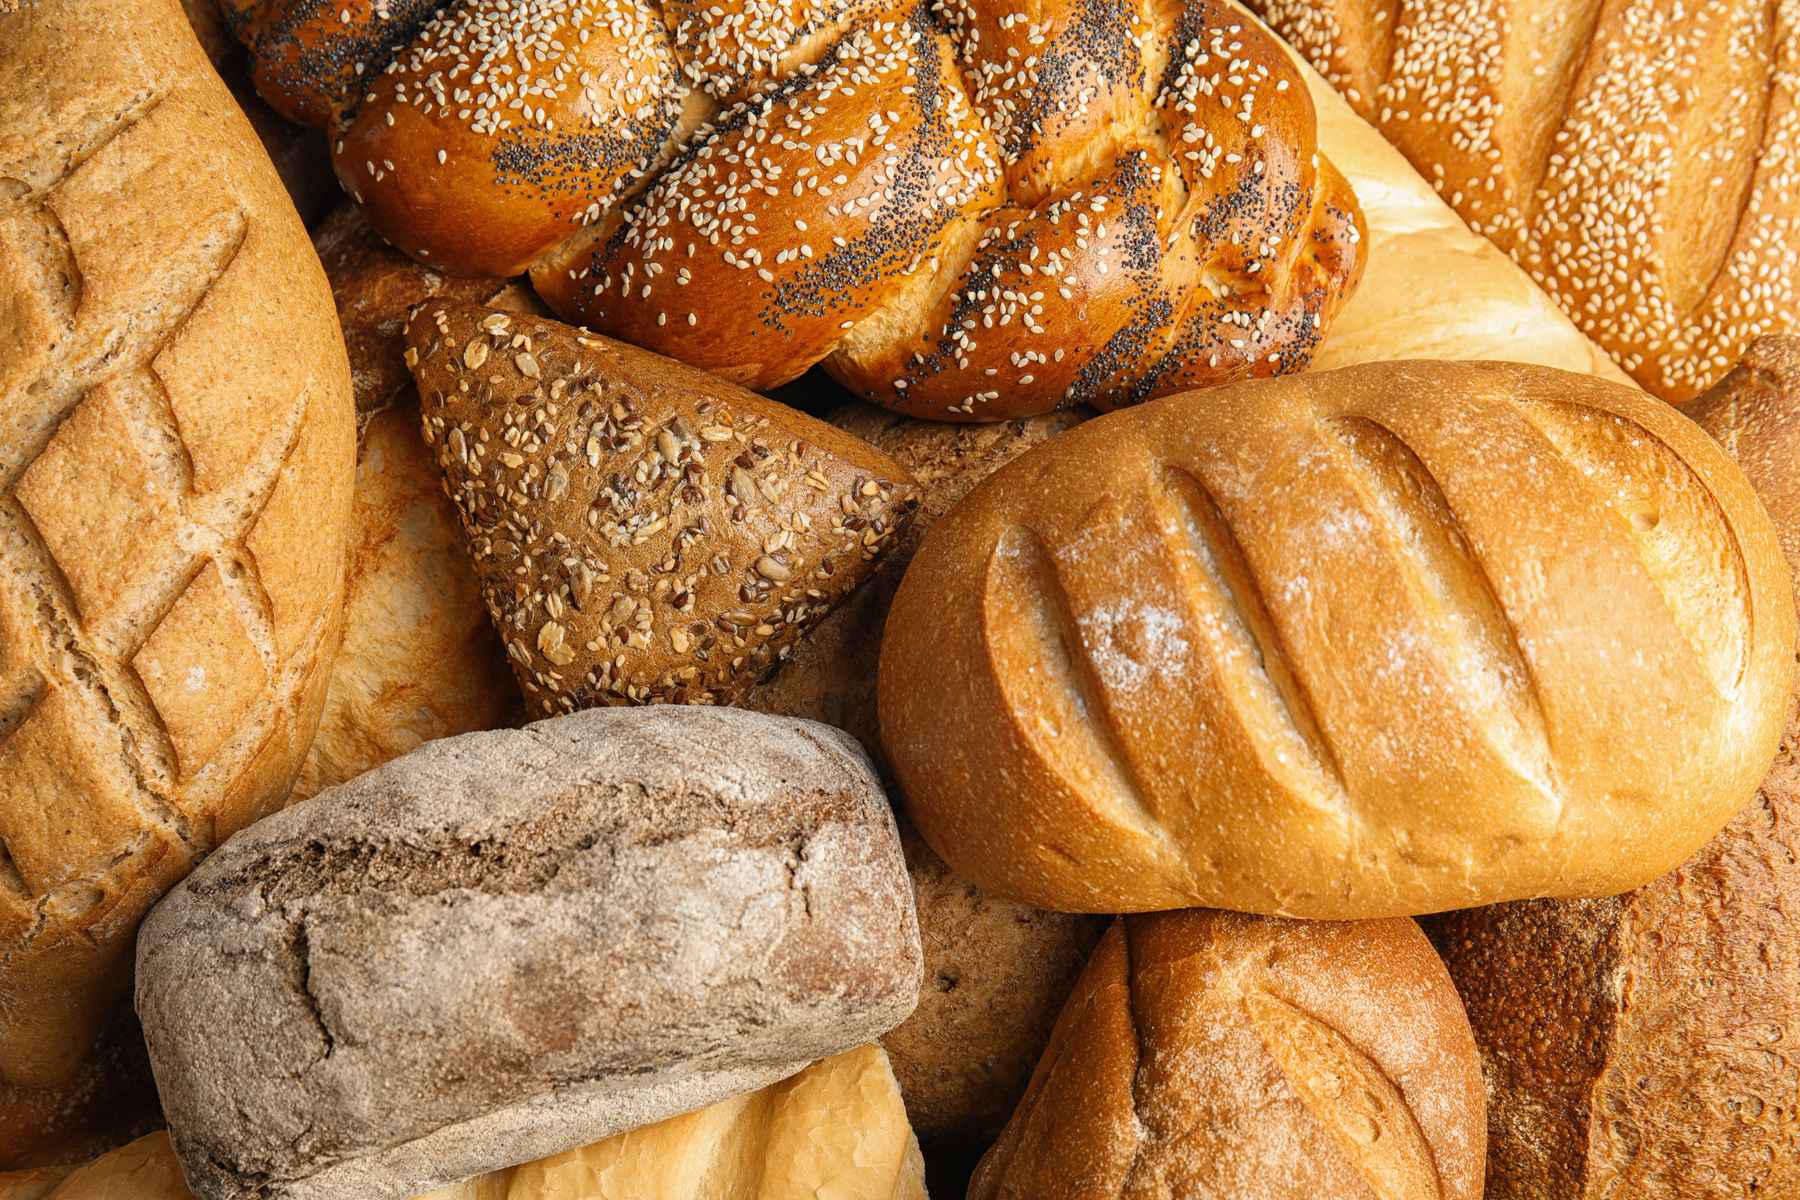 Assortment of loves of bread with different patterns slashed into the crusts.